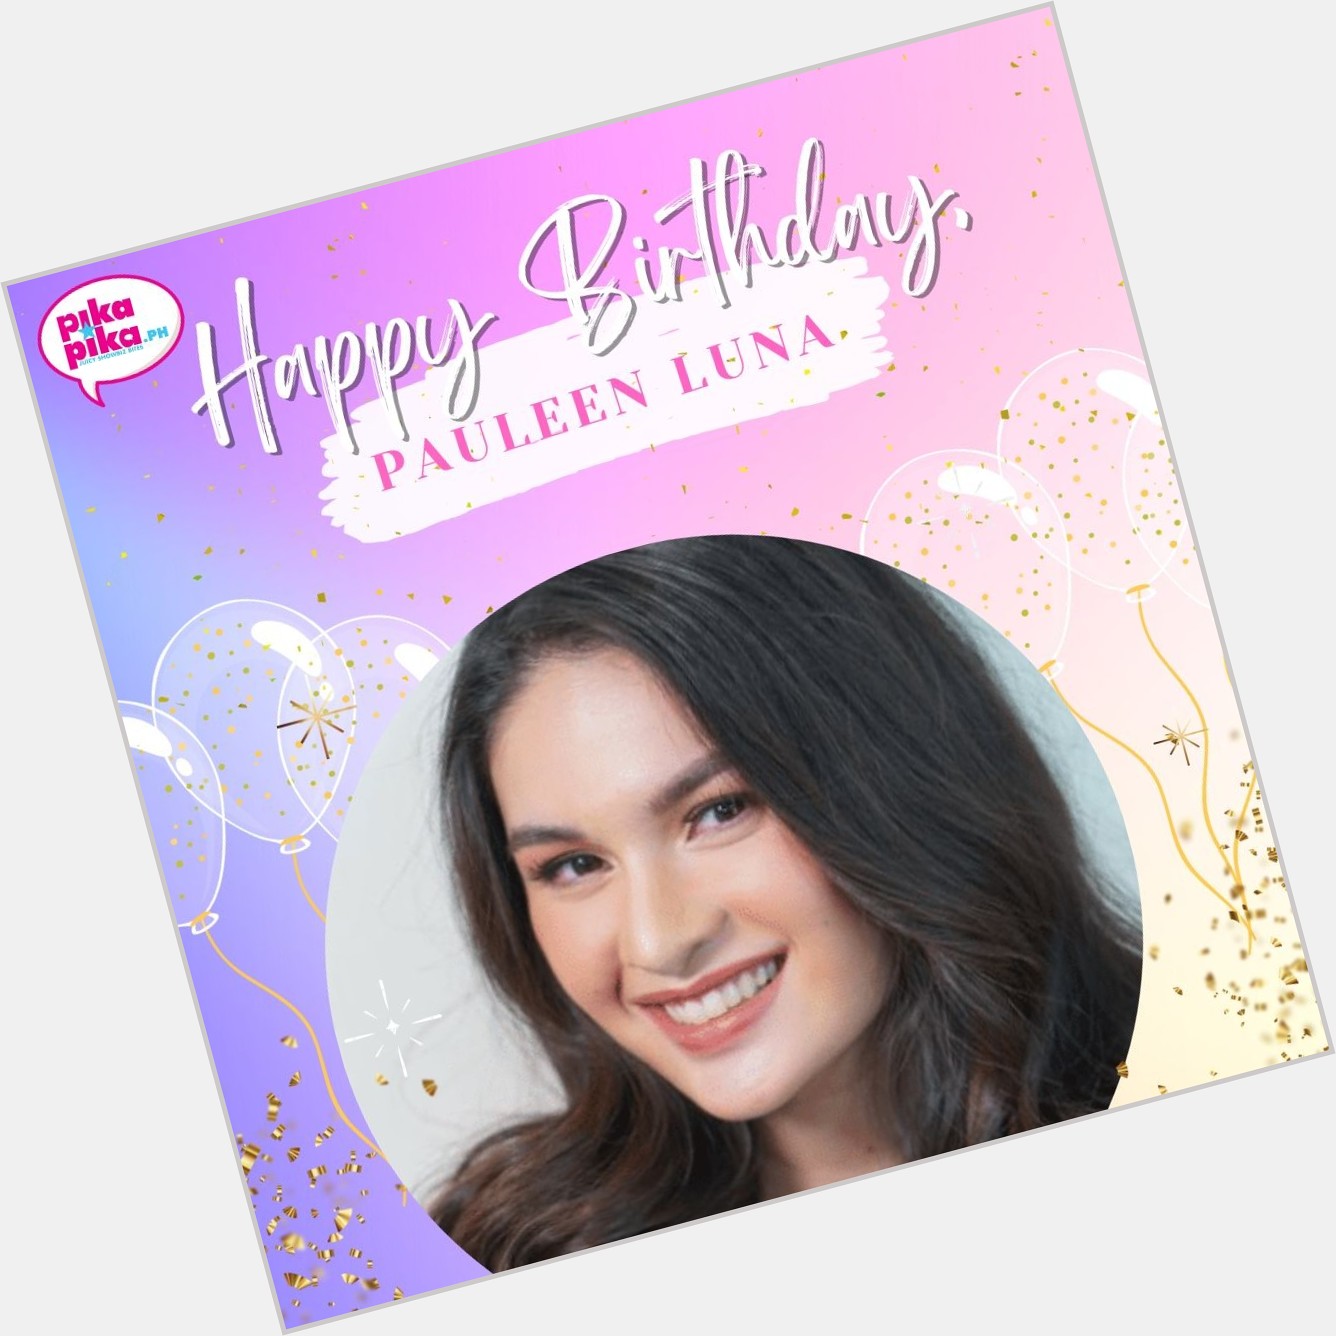 Happy birthday, Pauleen Luna! May your special day be filled with love and cheers.    